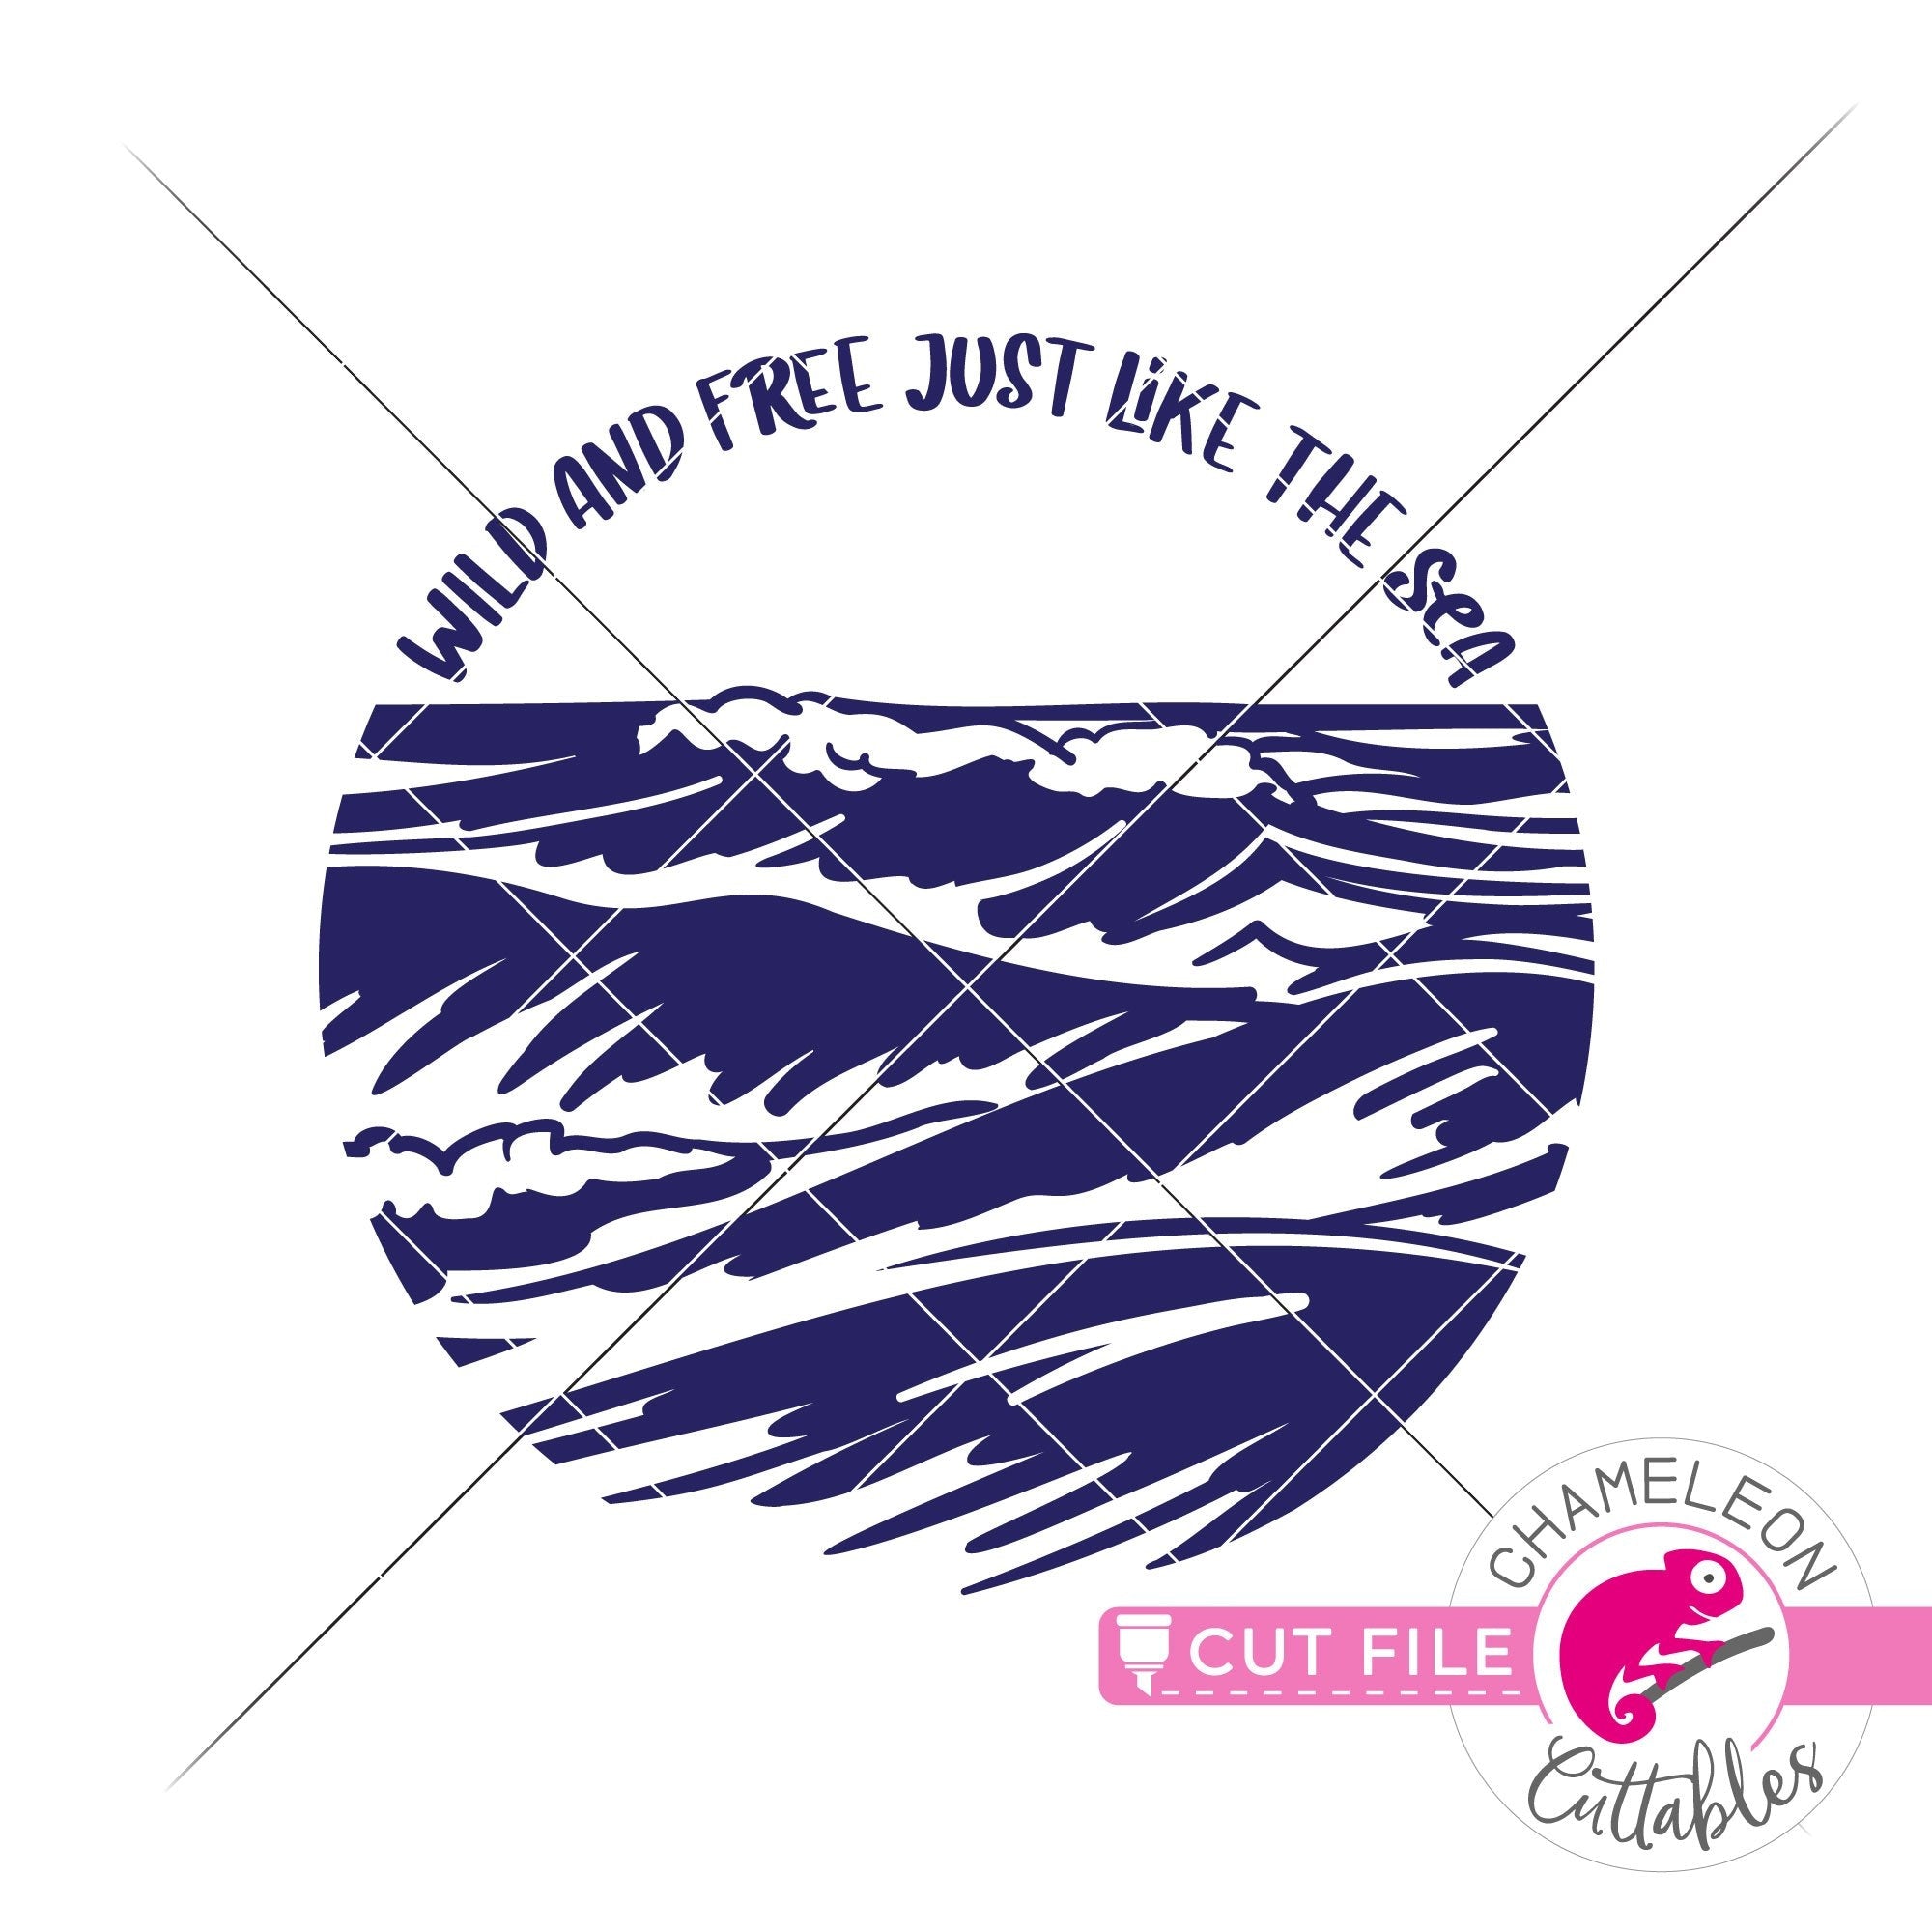 Download Wild And Free Just Like The Sea Ocean Waves Circle Svg Png Dxf Eps Jpeg Chameleon Cuttables Llc Chameleon Cuttables Llc